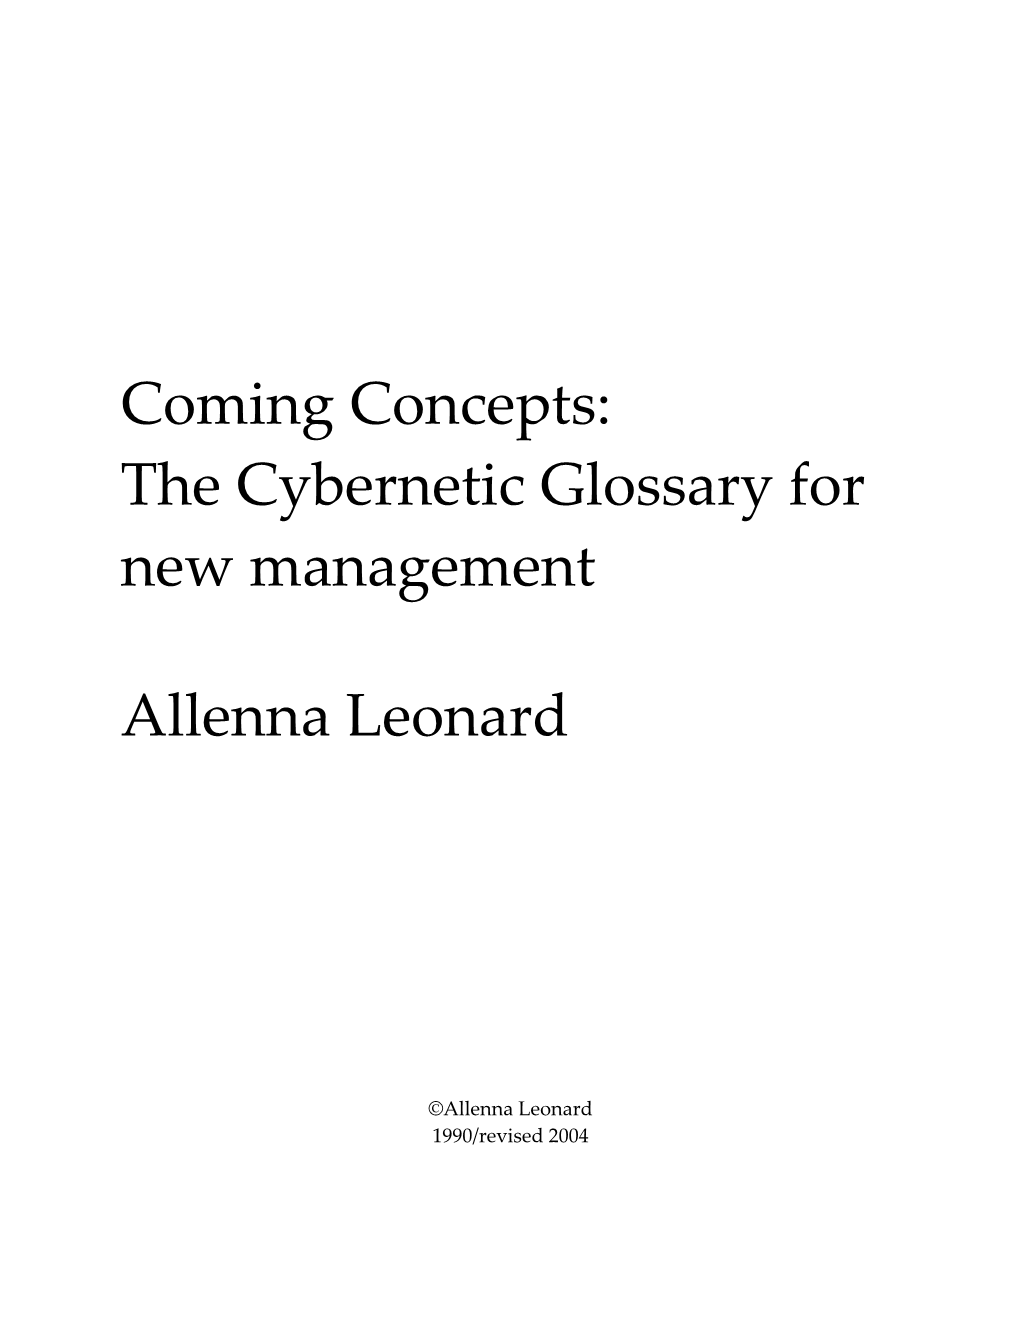 Glossary of Cybernetics Terms